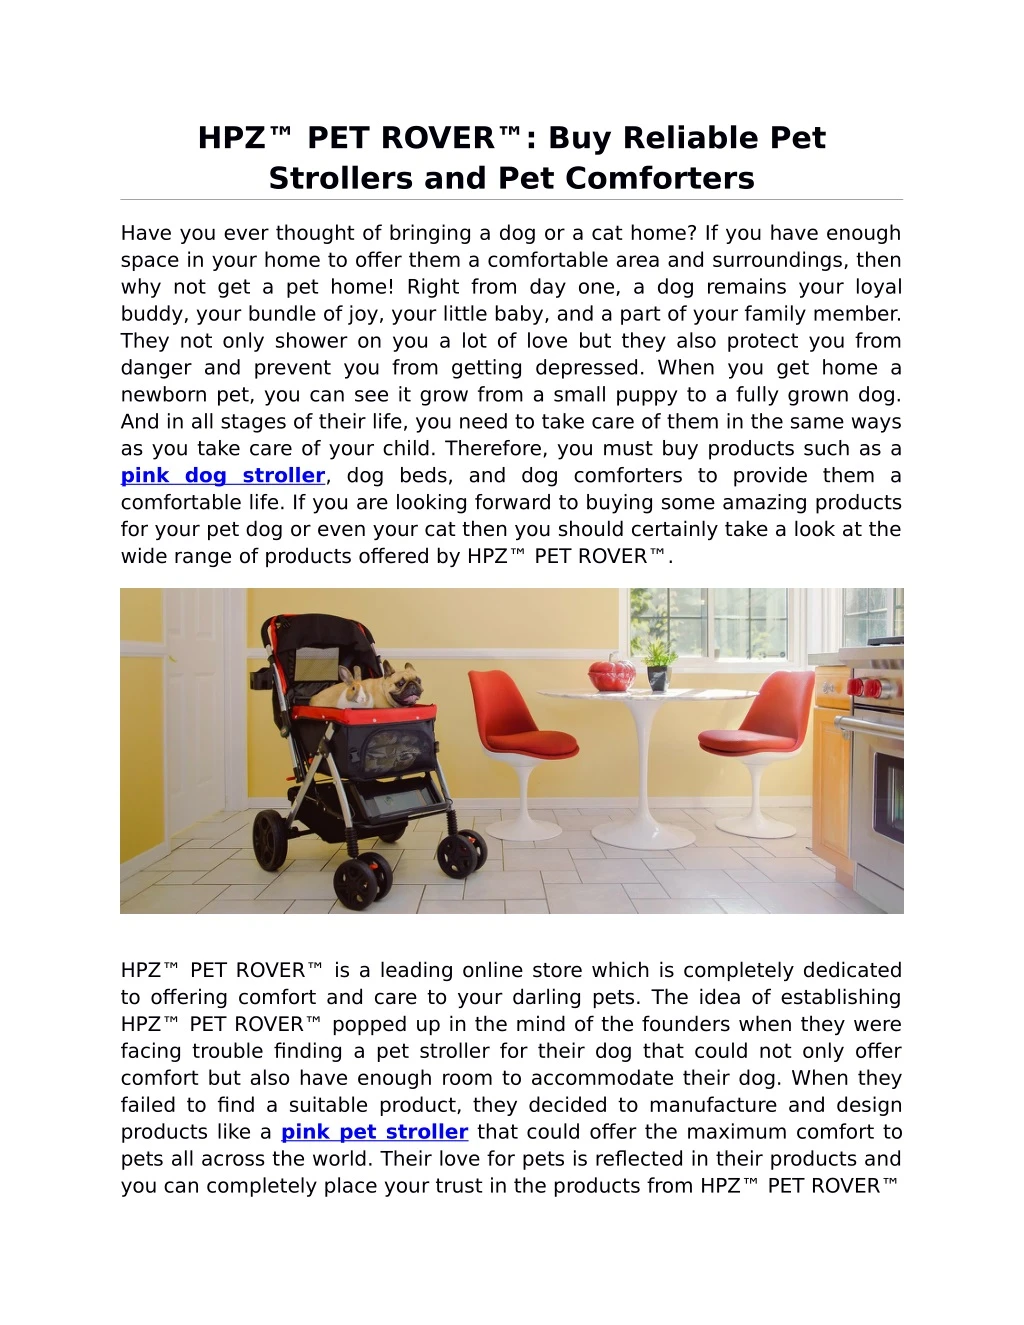 hpz pet rover buy reliable pet strollers